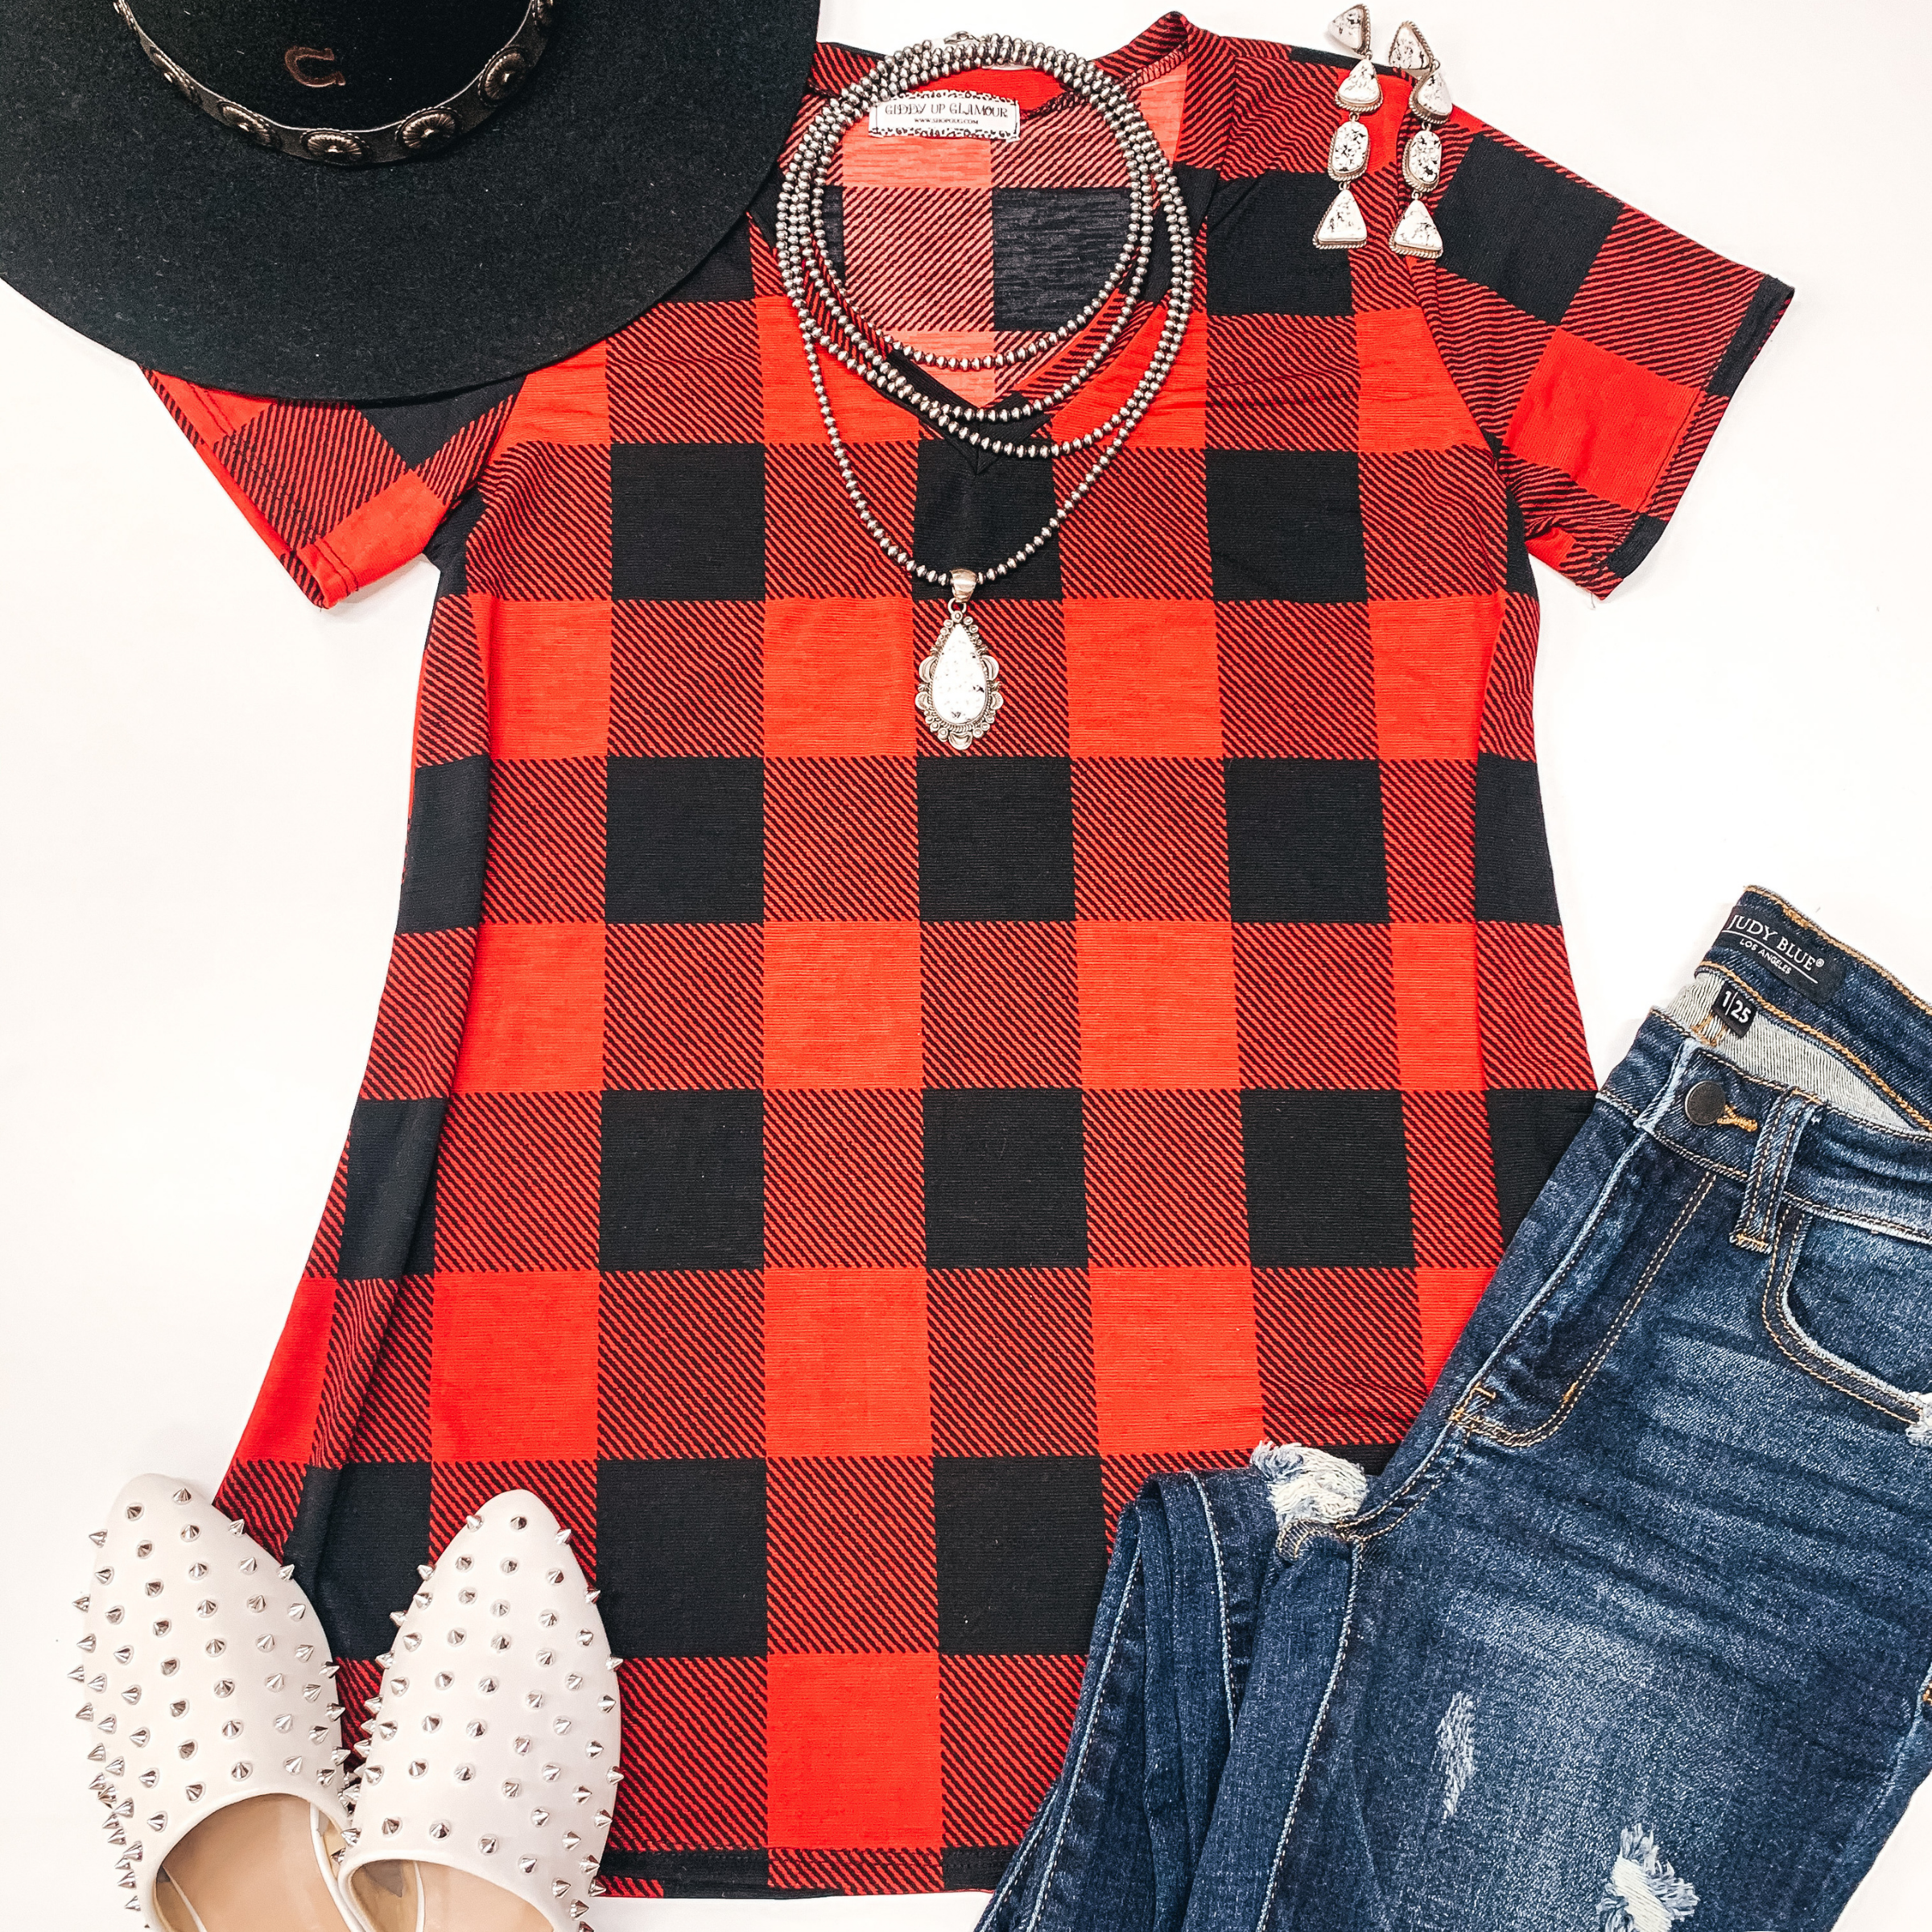 Keep Things Simple Buffalo Plaid V Neck Tee in Red - Giddy Up Glamour Boutique